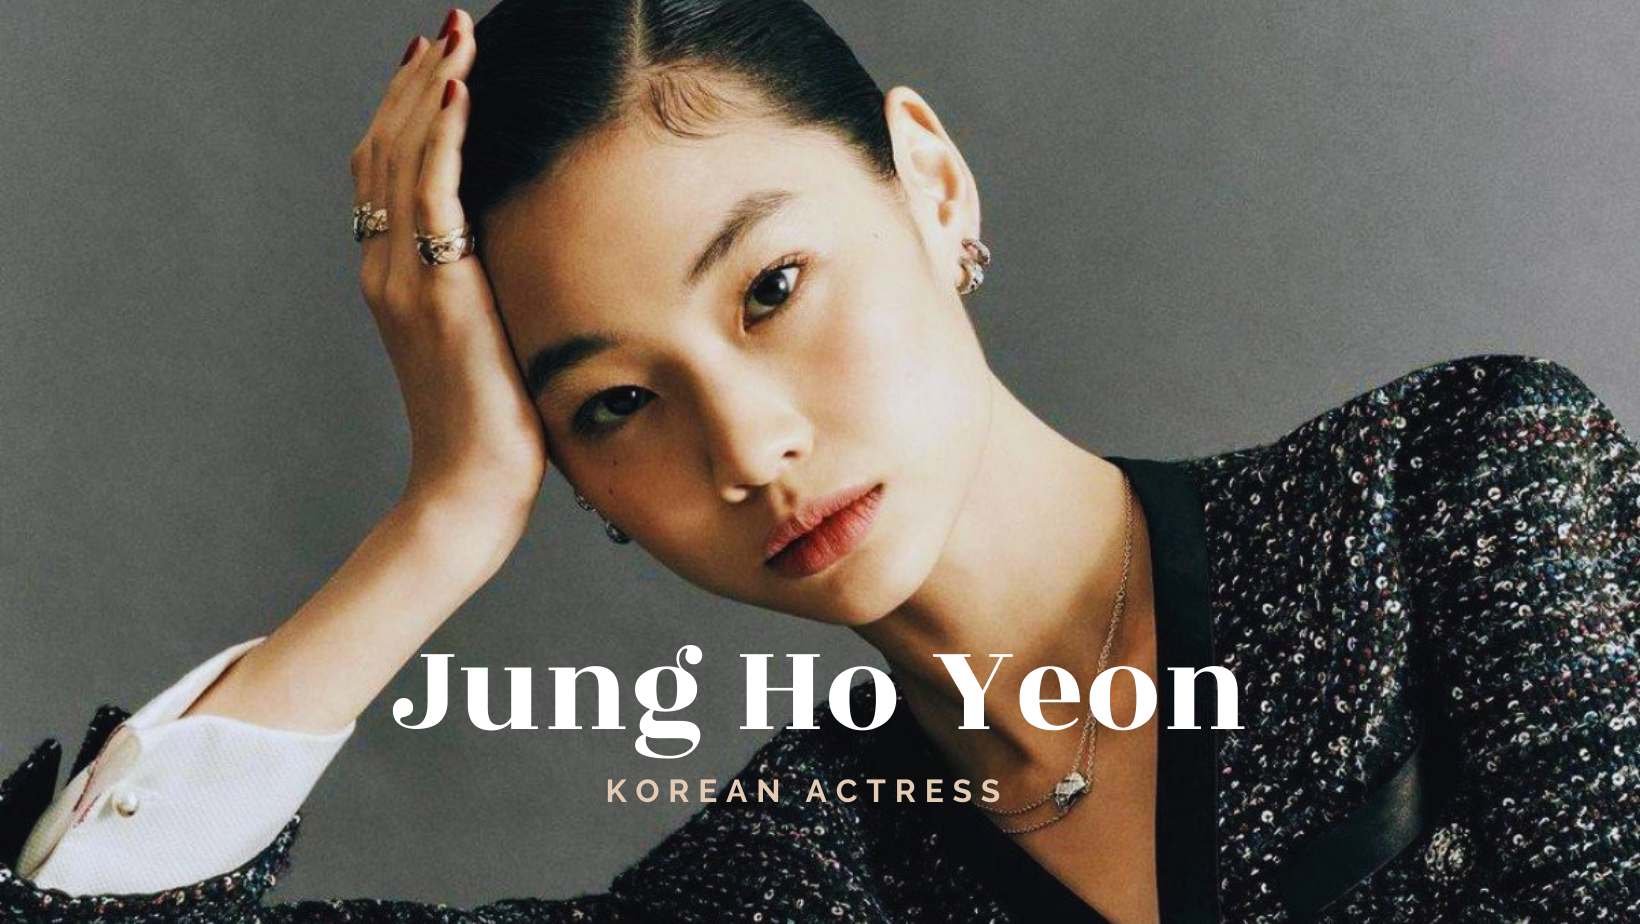 K-Drama Feels - Did you know? Hoyeon Jung, who played as Kang Sae